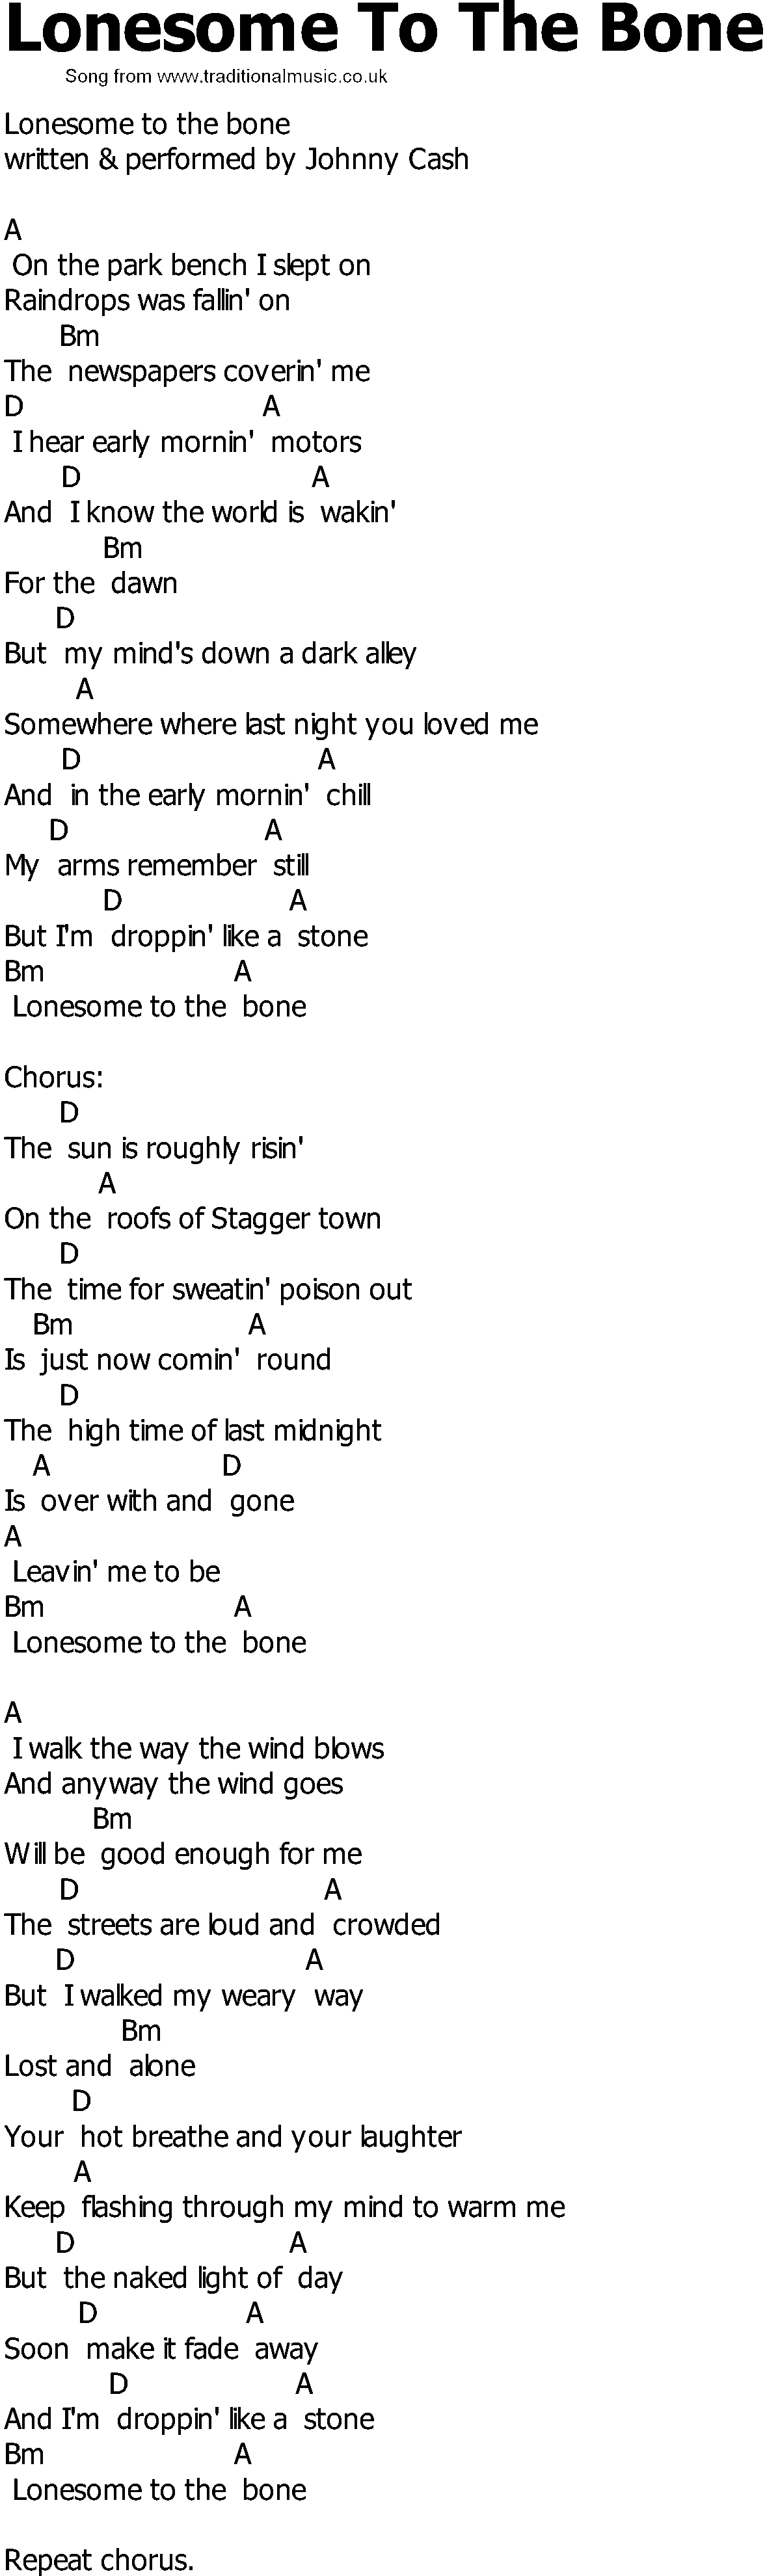 Old Country song lyrics with chords - Lonesome To The Bone